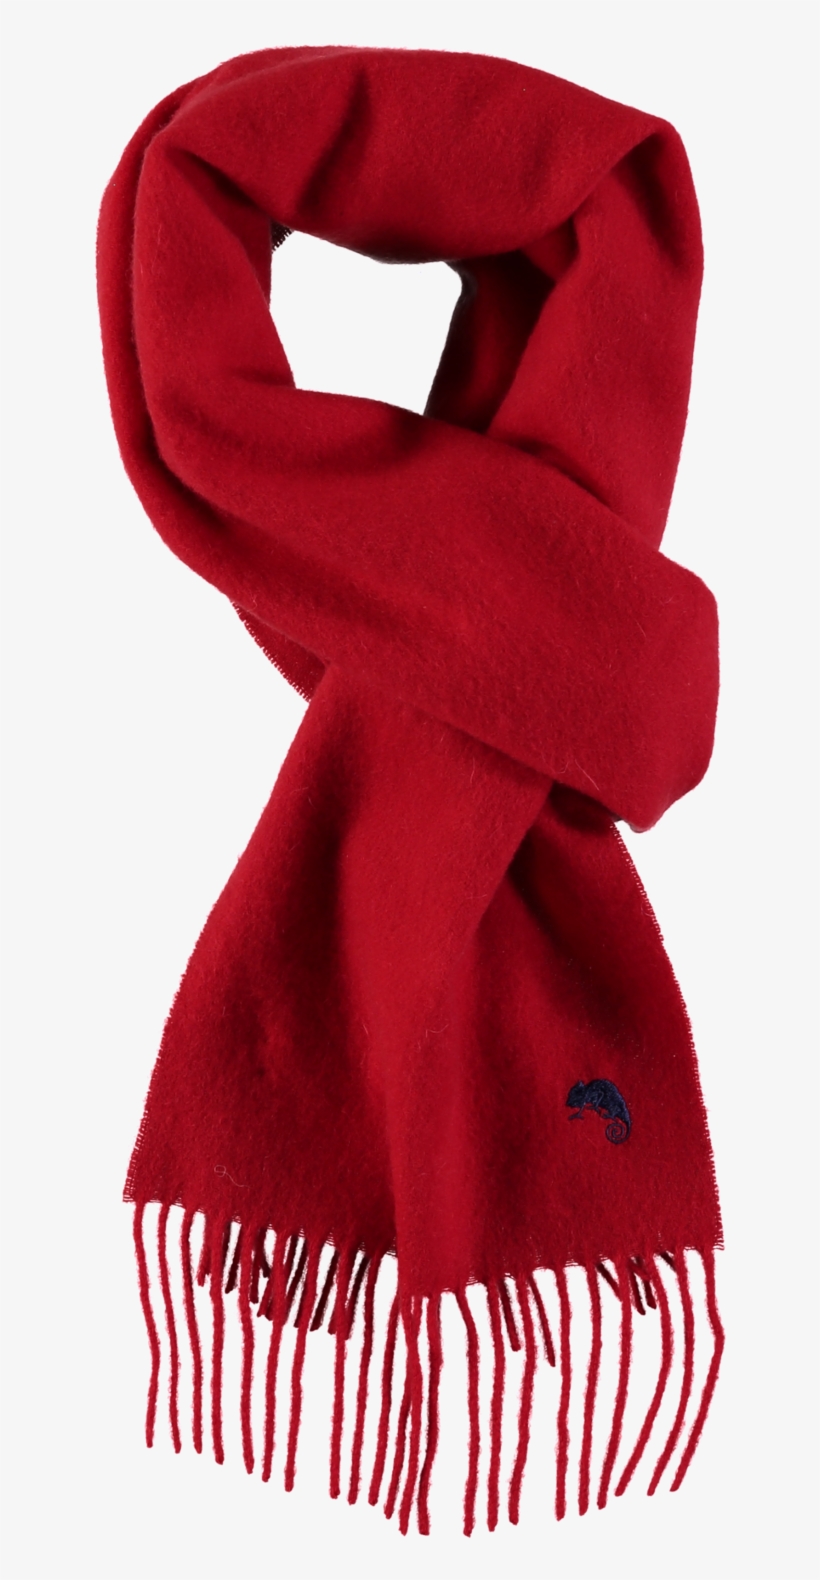 Cashmere Scarf Red 100% Cashmere Scarf - Scarf Png, transparent png #1665830